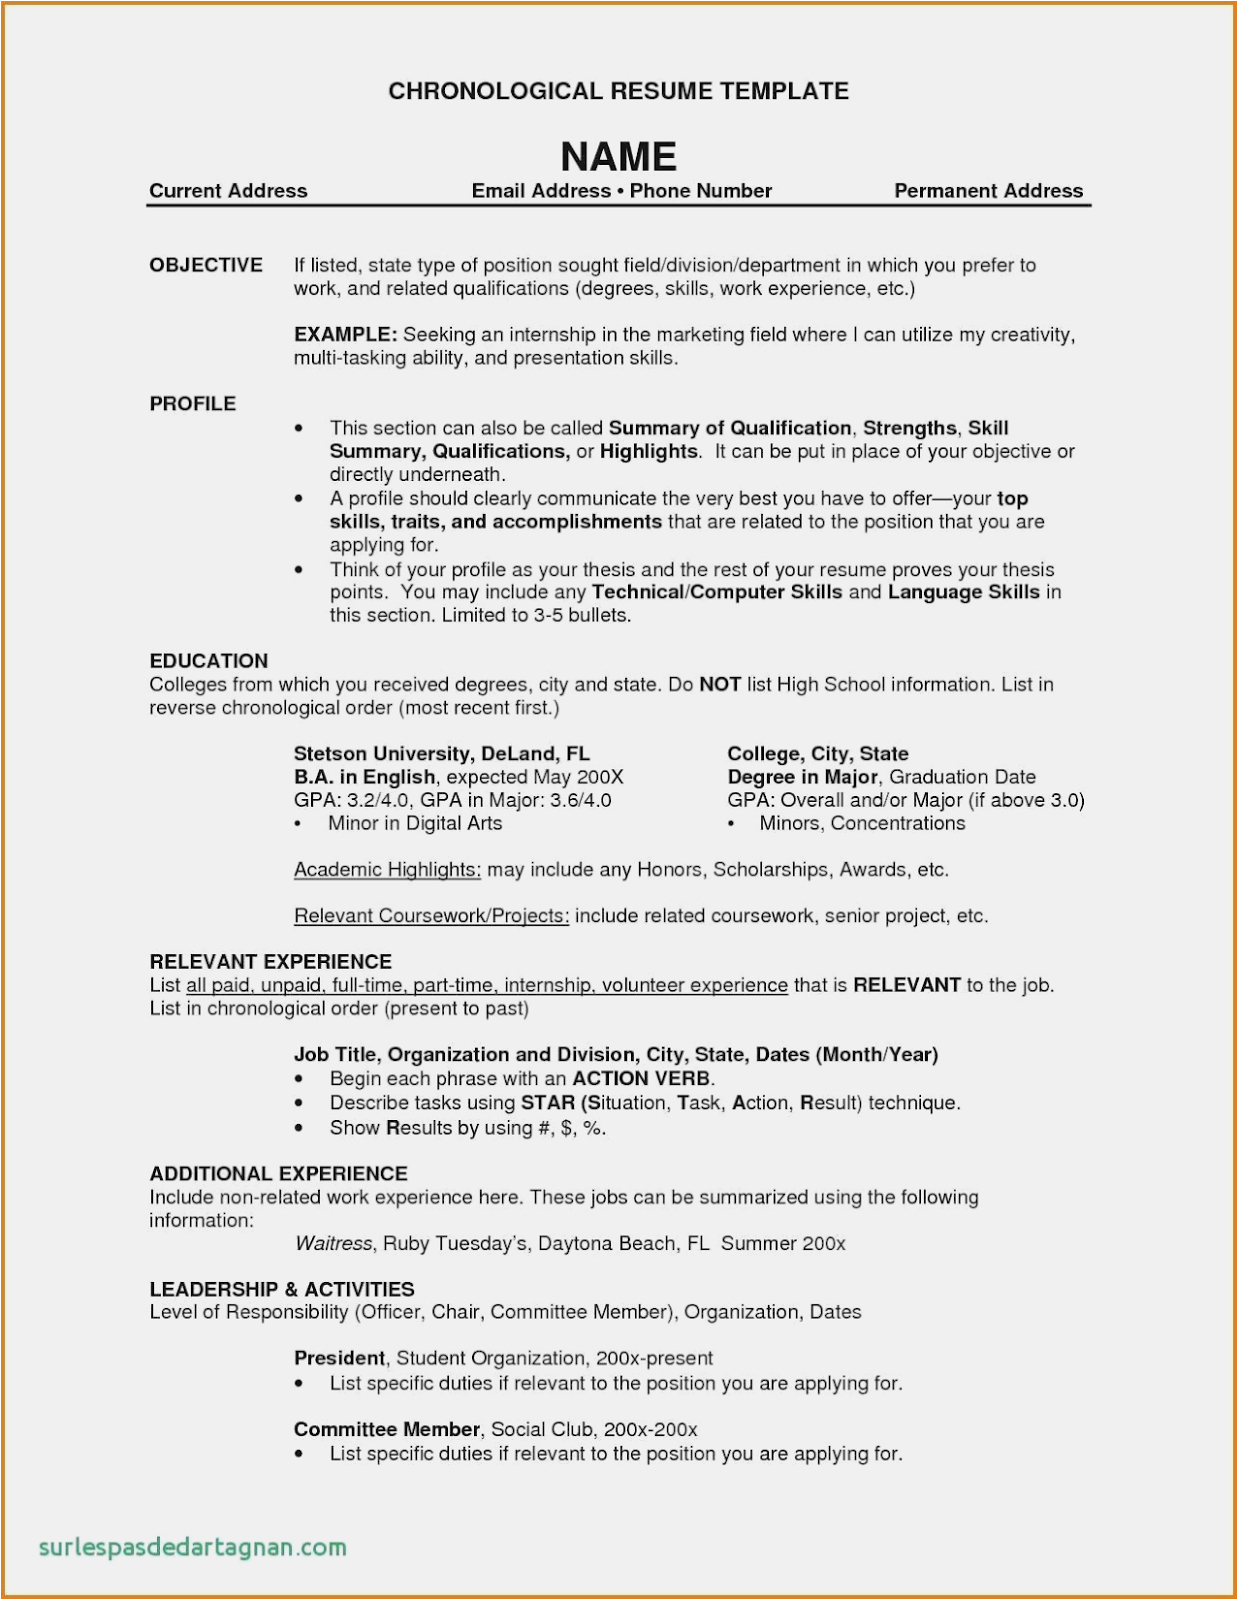 Sample Copy Of A Good Resume A Good Resume Title A Good Resume Title for Customer Service What is A